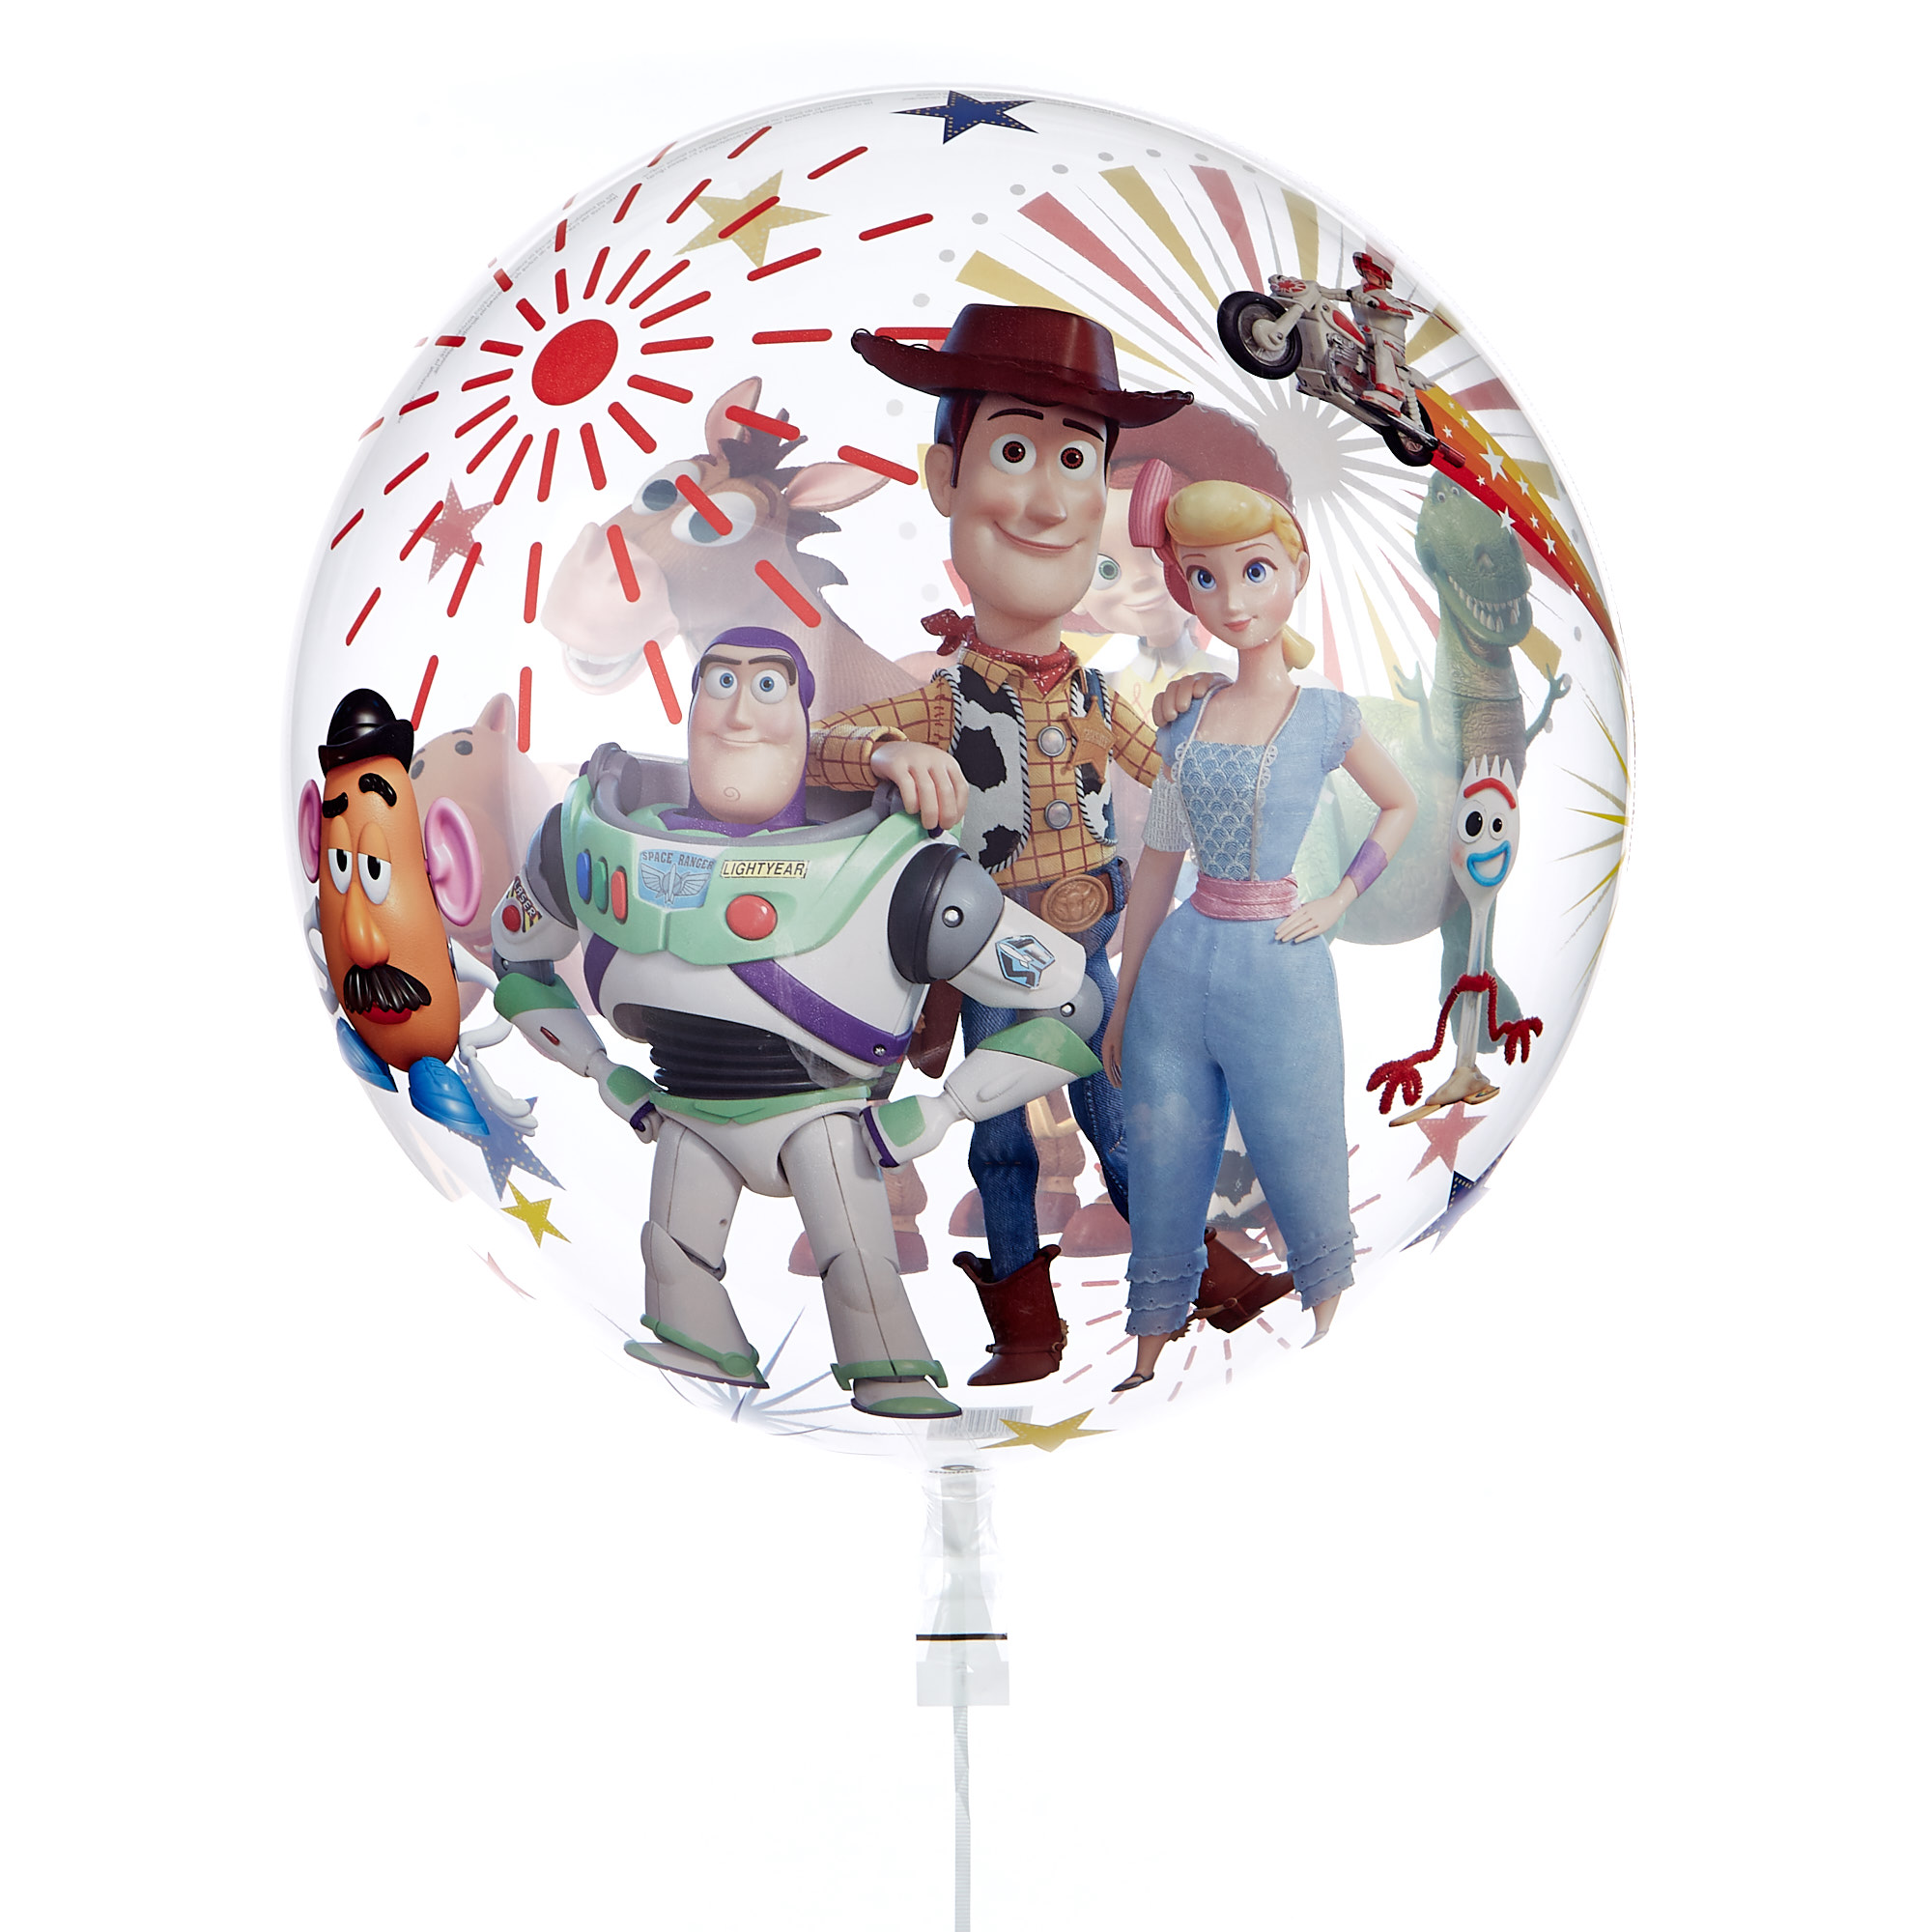 22-Inch Bubble Balloon - Toy Story 4 - DELIVERED INFLATED!